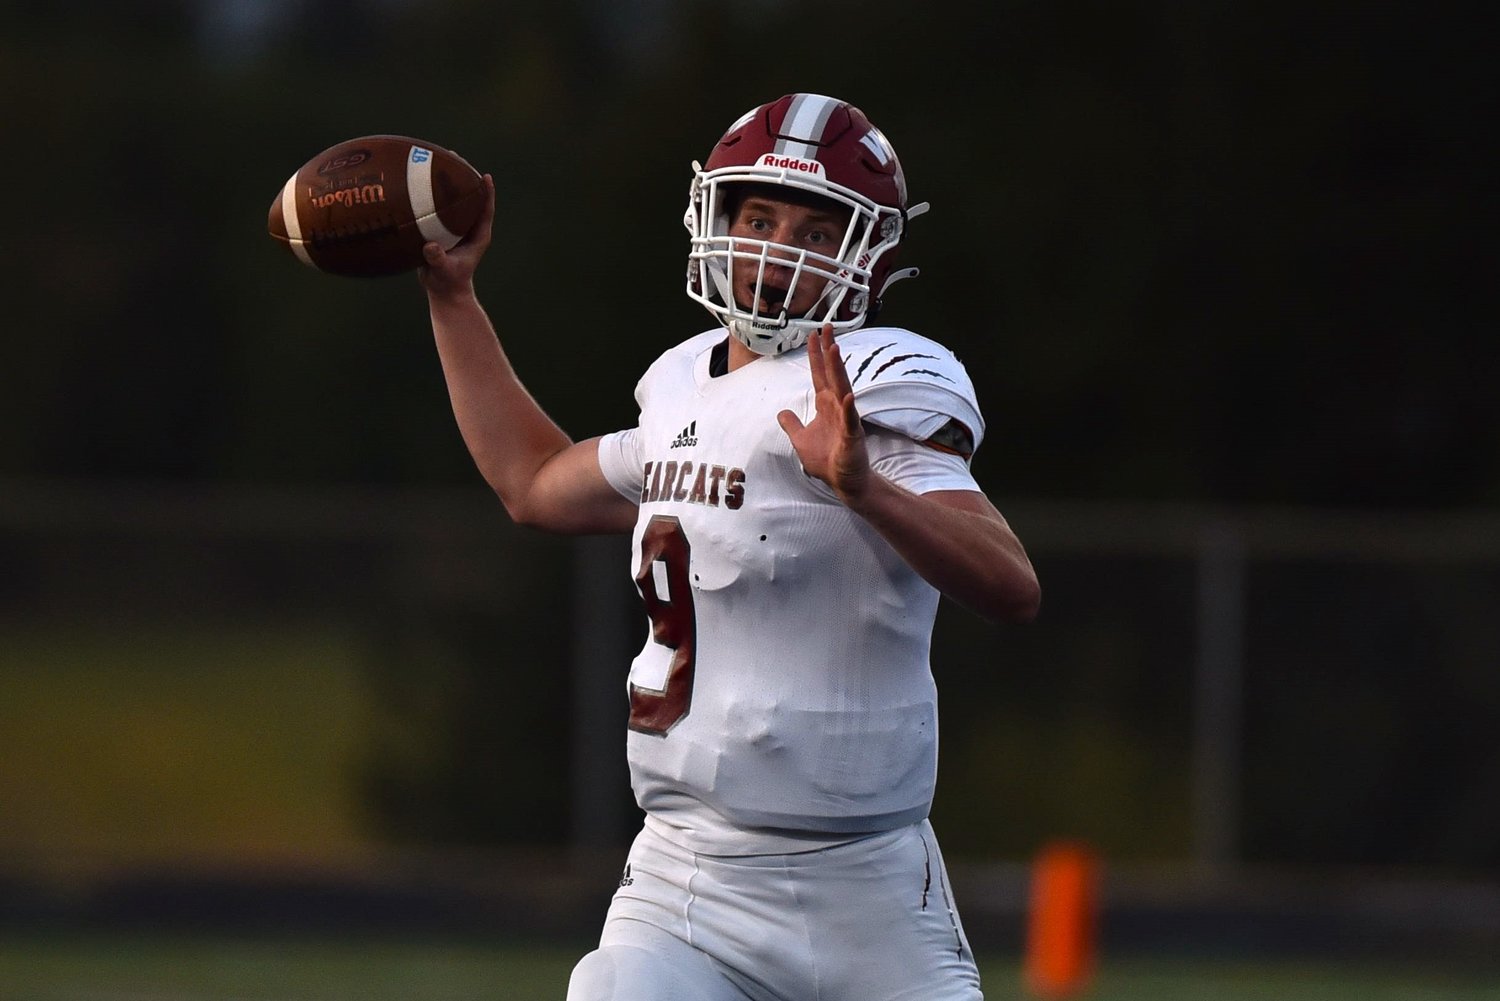 Gavin Fugate fires a pass during W.F. West's 38-28 win over Ridgefield on the road on Sept. 3.